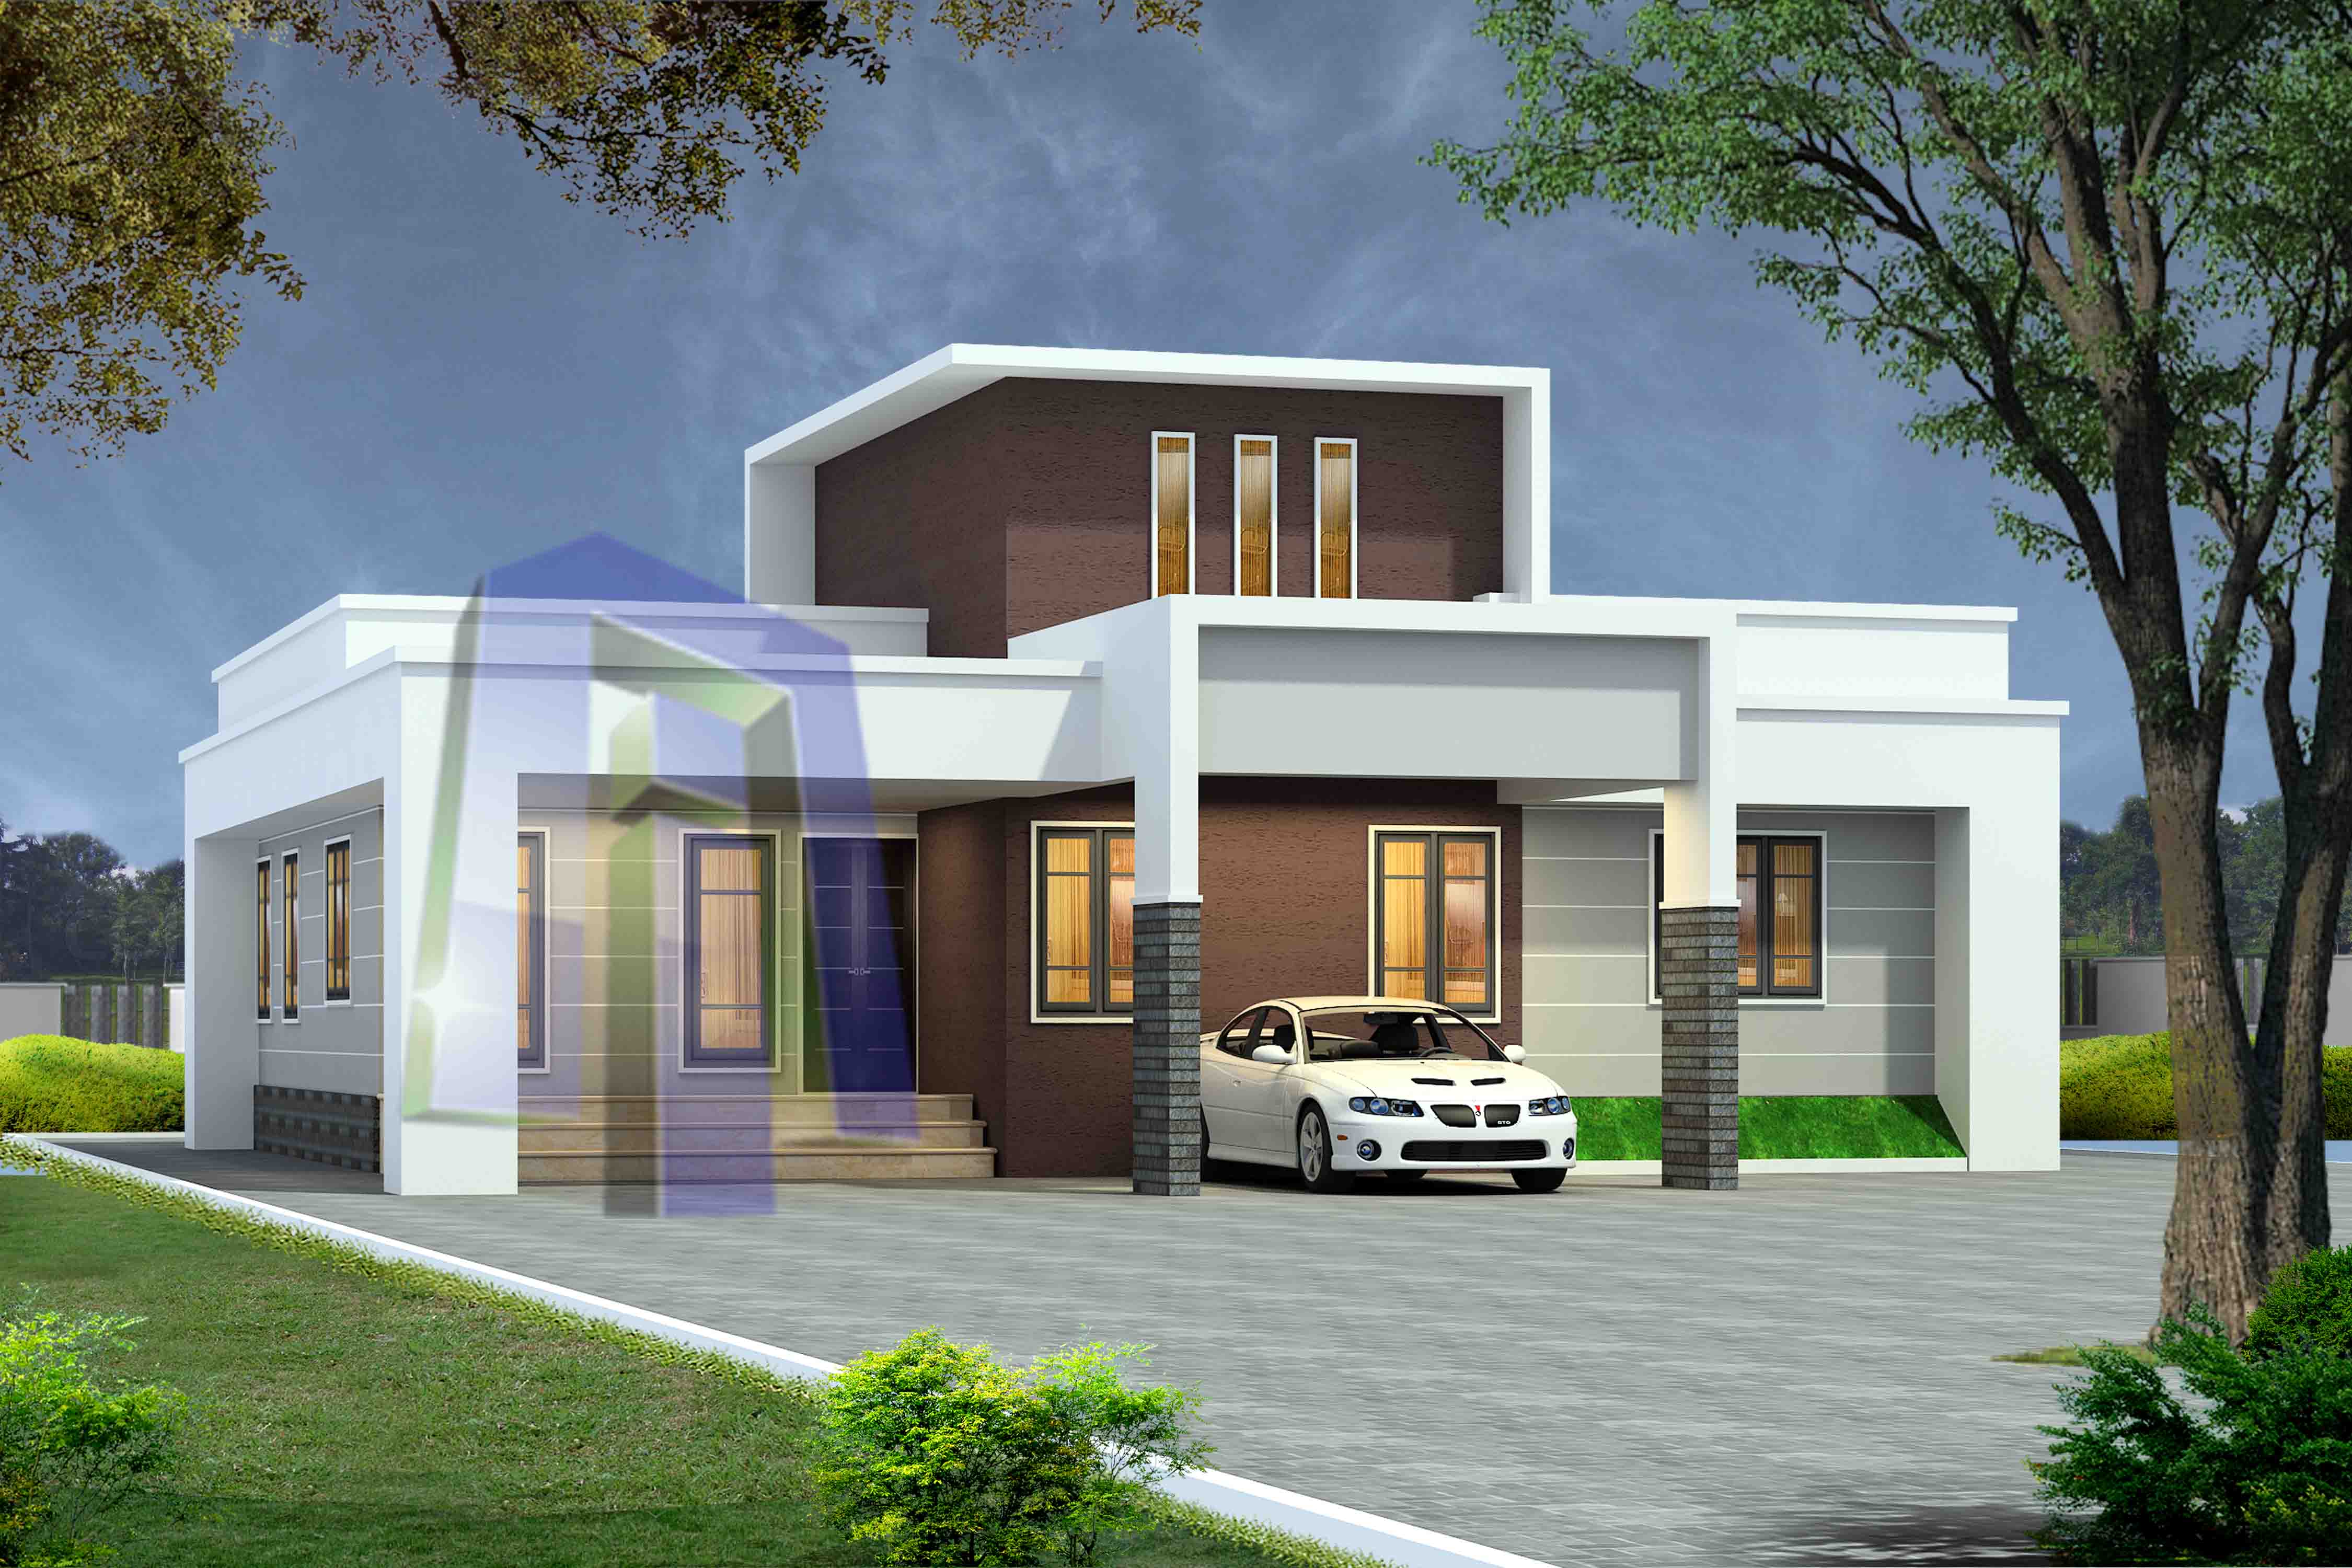 5 Lakhs Budget House Plans In Kerala